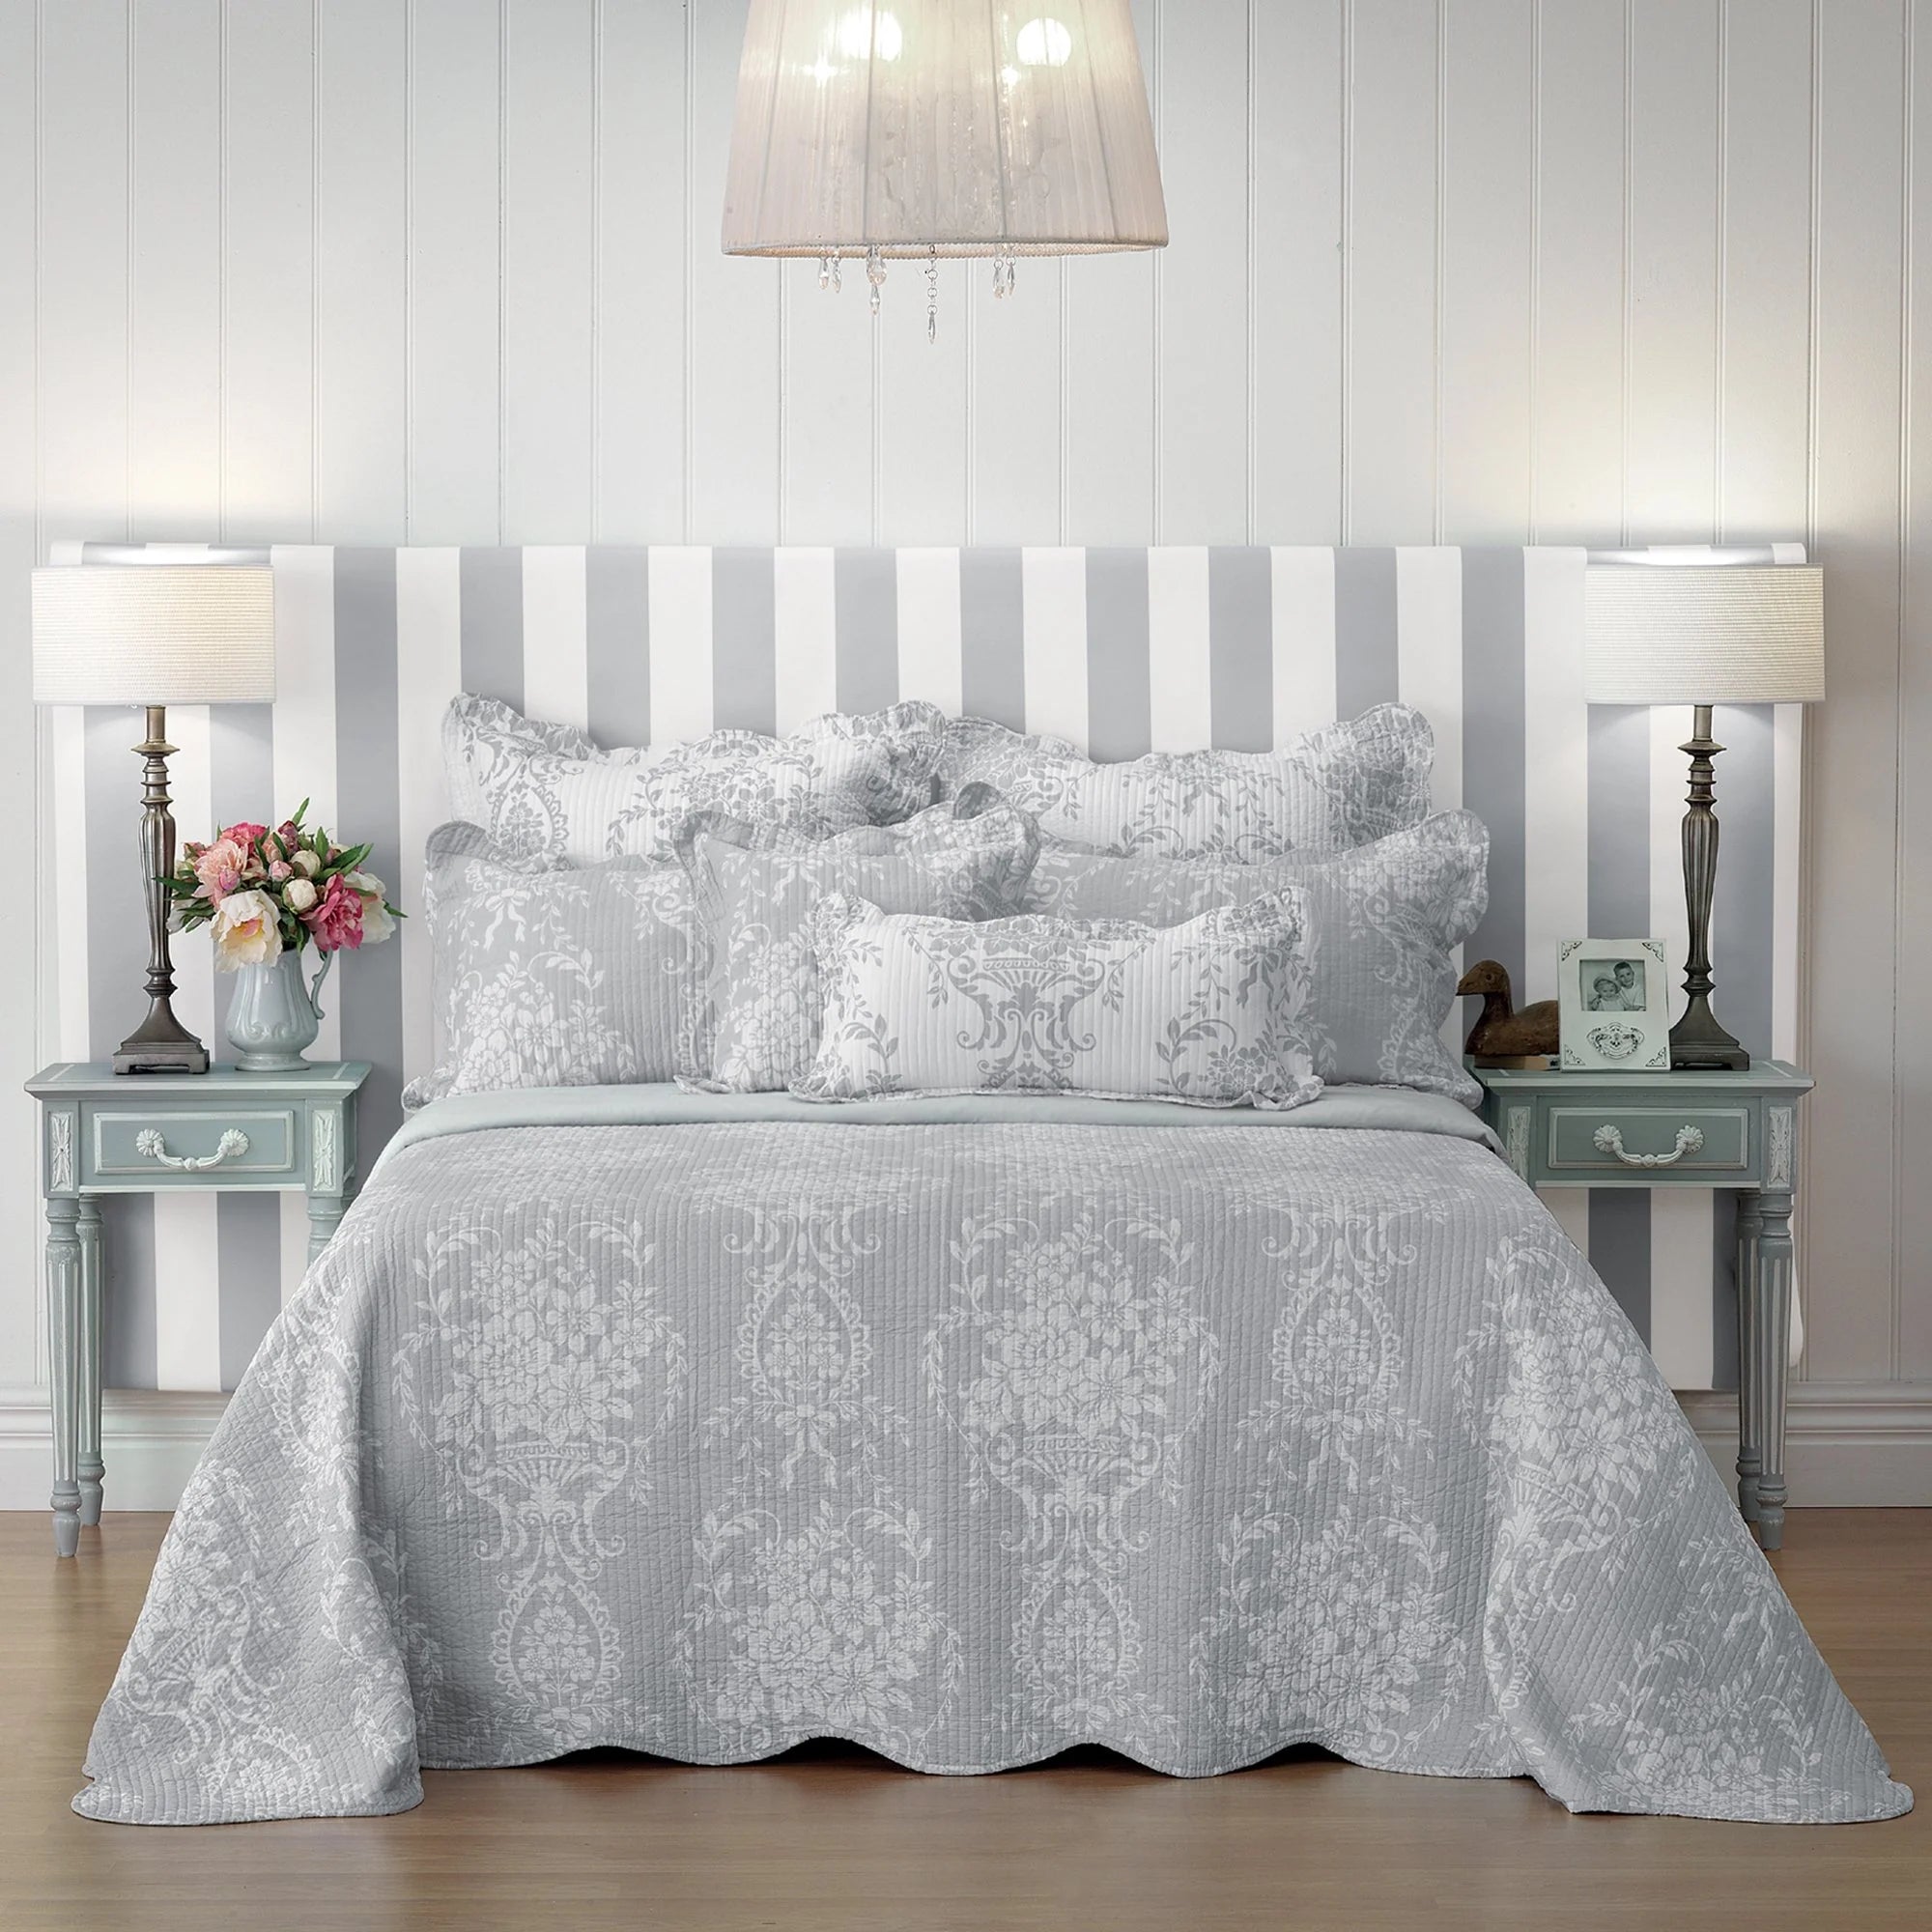 Indulge in the elegance of a French provincial boudoir with this exquisite bedspread. Crafted from luxurious soft textured fabric, it beautifully captures the essence of sophistication